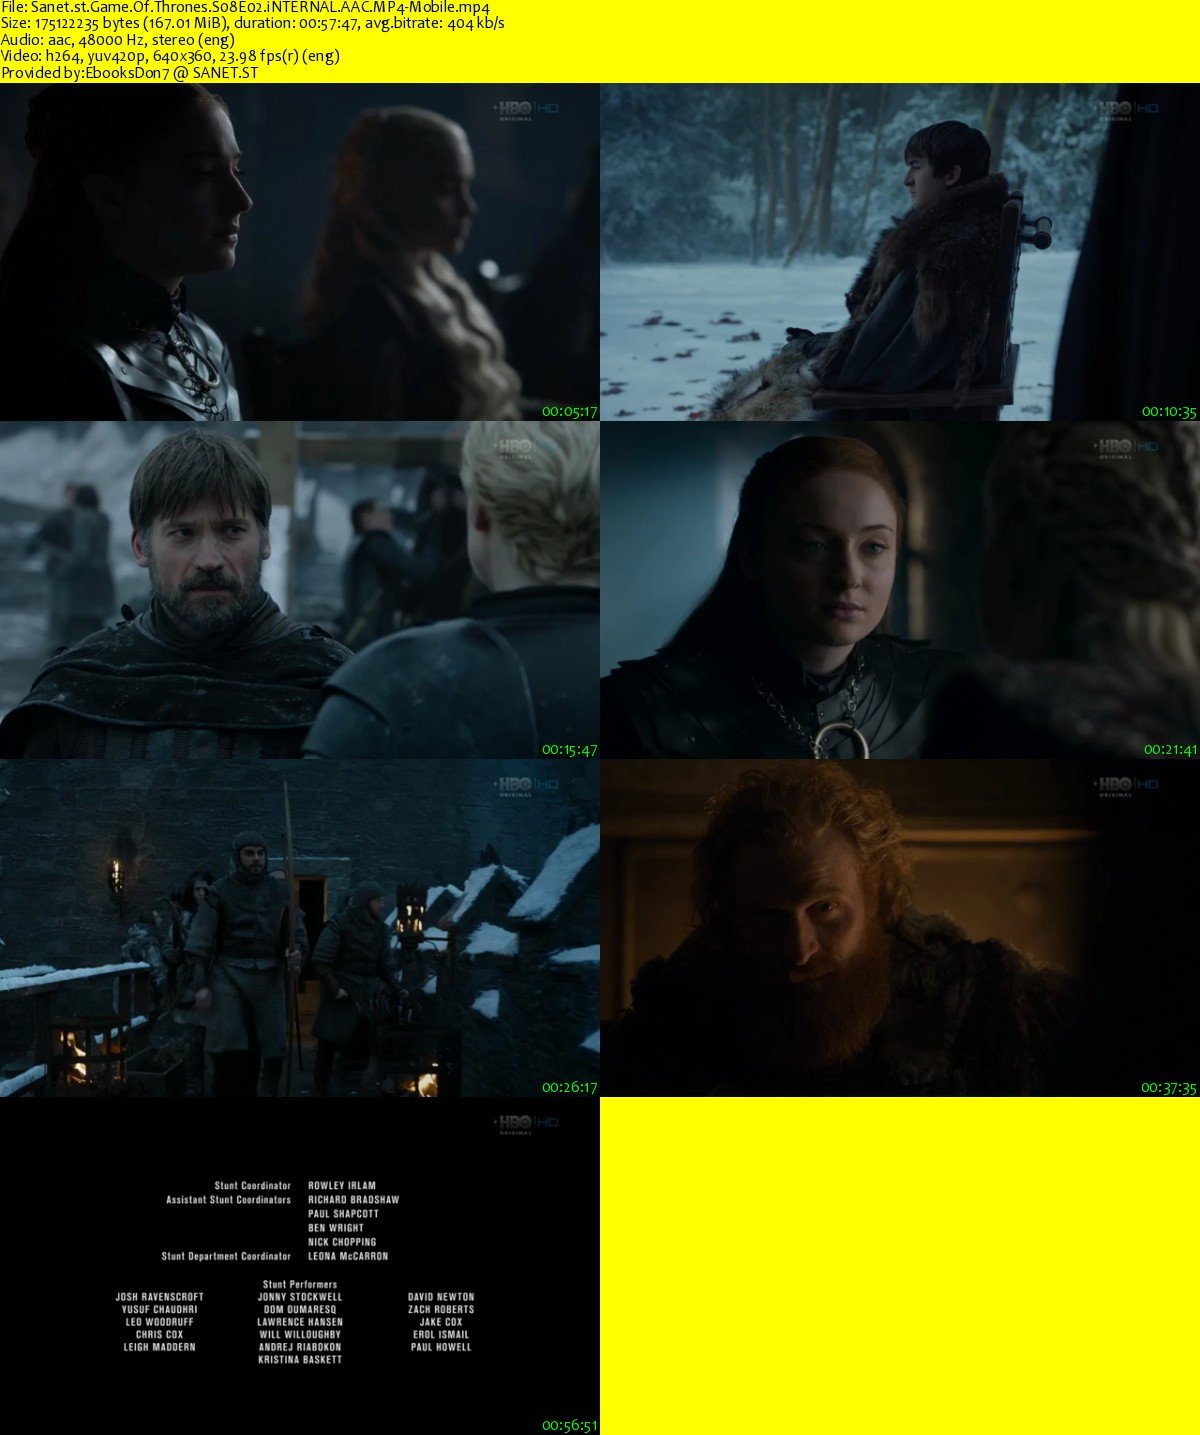 Download Game Of Thrones S08e02 Internal Aac Mp4 Mobile